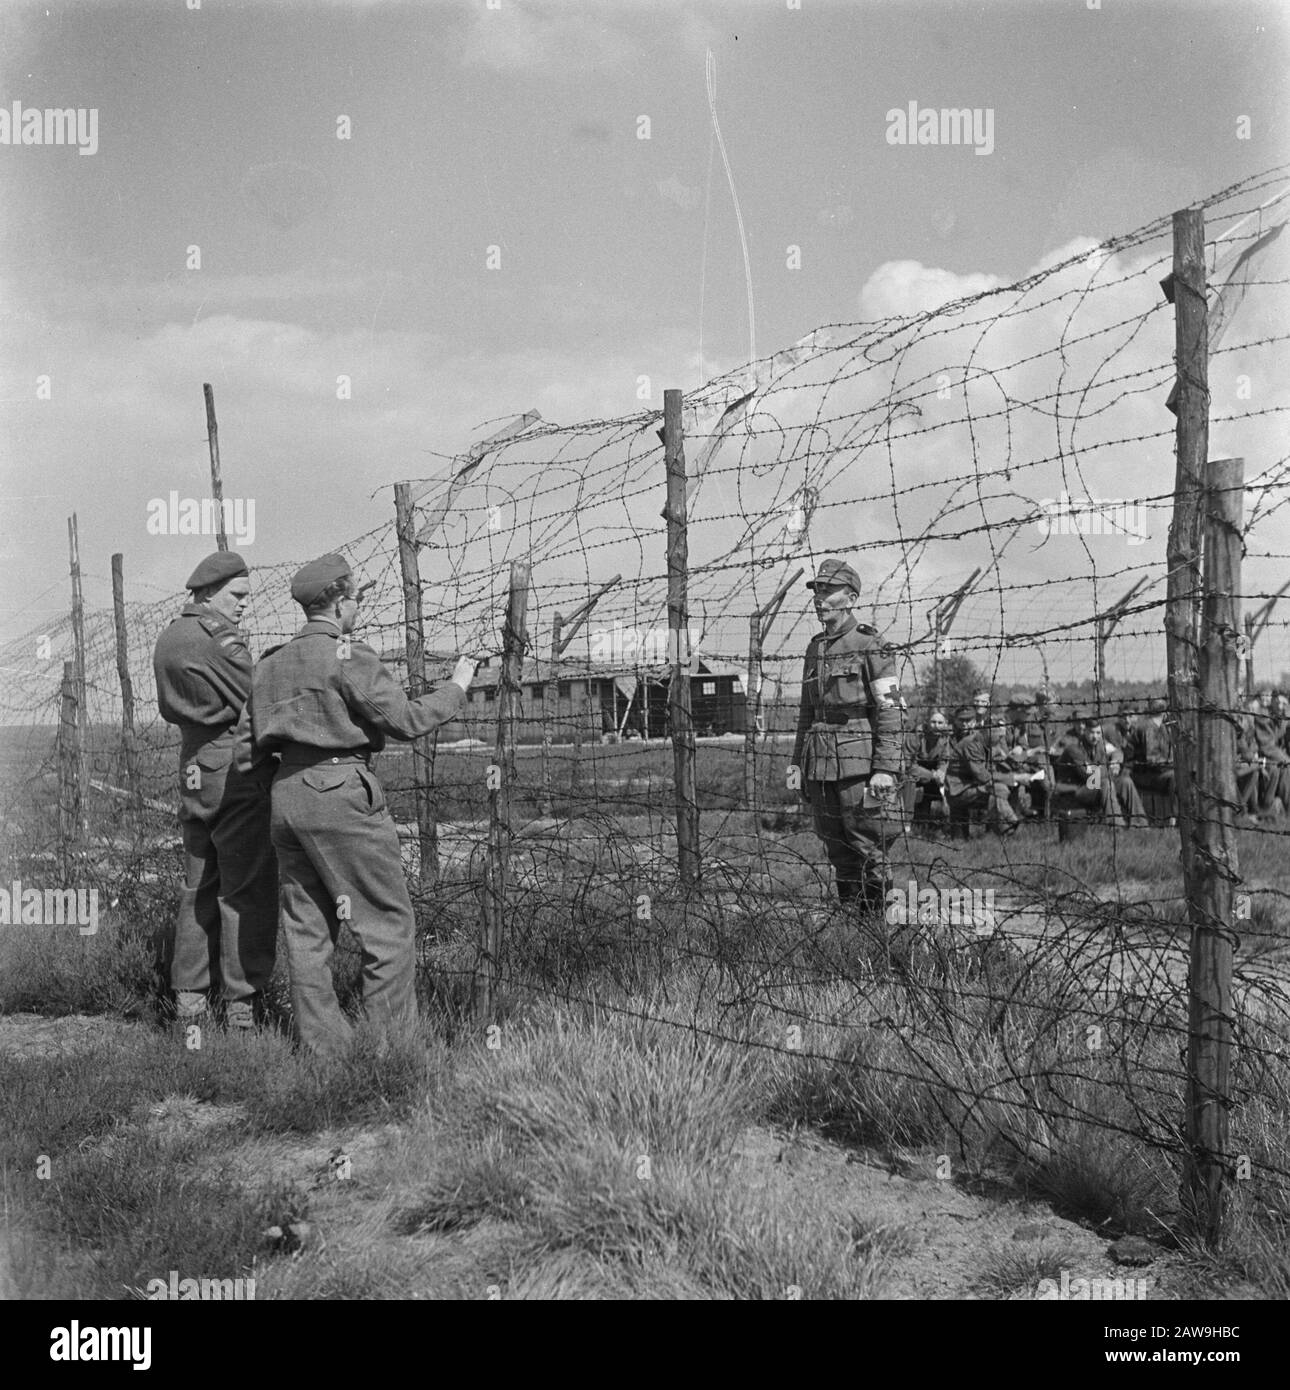 Capitulation: Harskamp [camp where SS and National Guards are interned]  Soldiers at the barbed wire Annotation: In this camp were about 4,000 Dutch SS prisoners housed (including Army, Landstorm , Viking, Germania, Holl Grüne Polizei etc.) their trials awaited. Date: June 1945 Location: Gelderland, Harskamp Keywords: internment camps, prisoner of war, soldiers Stock Photo